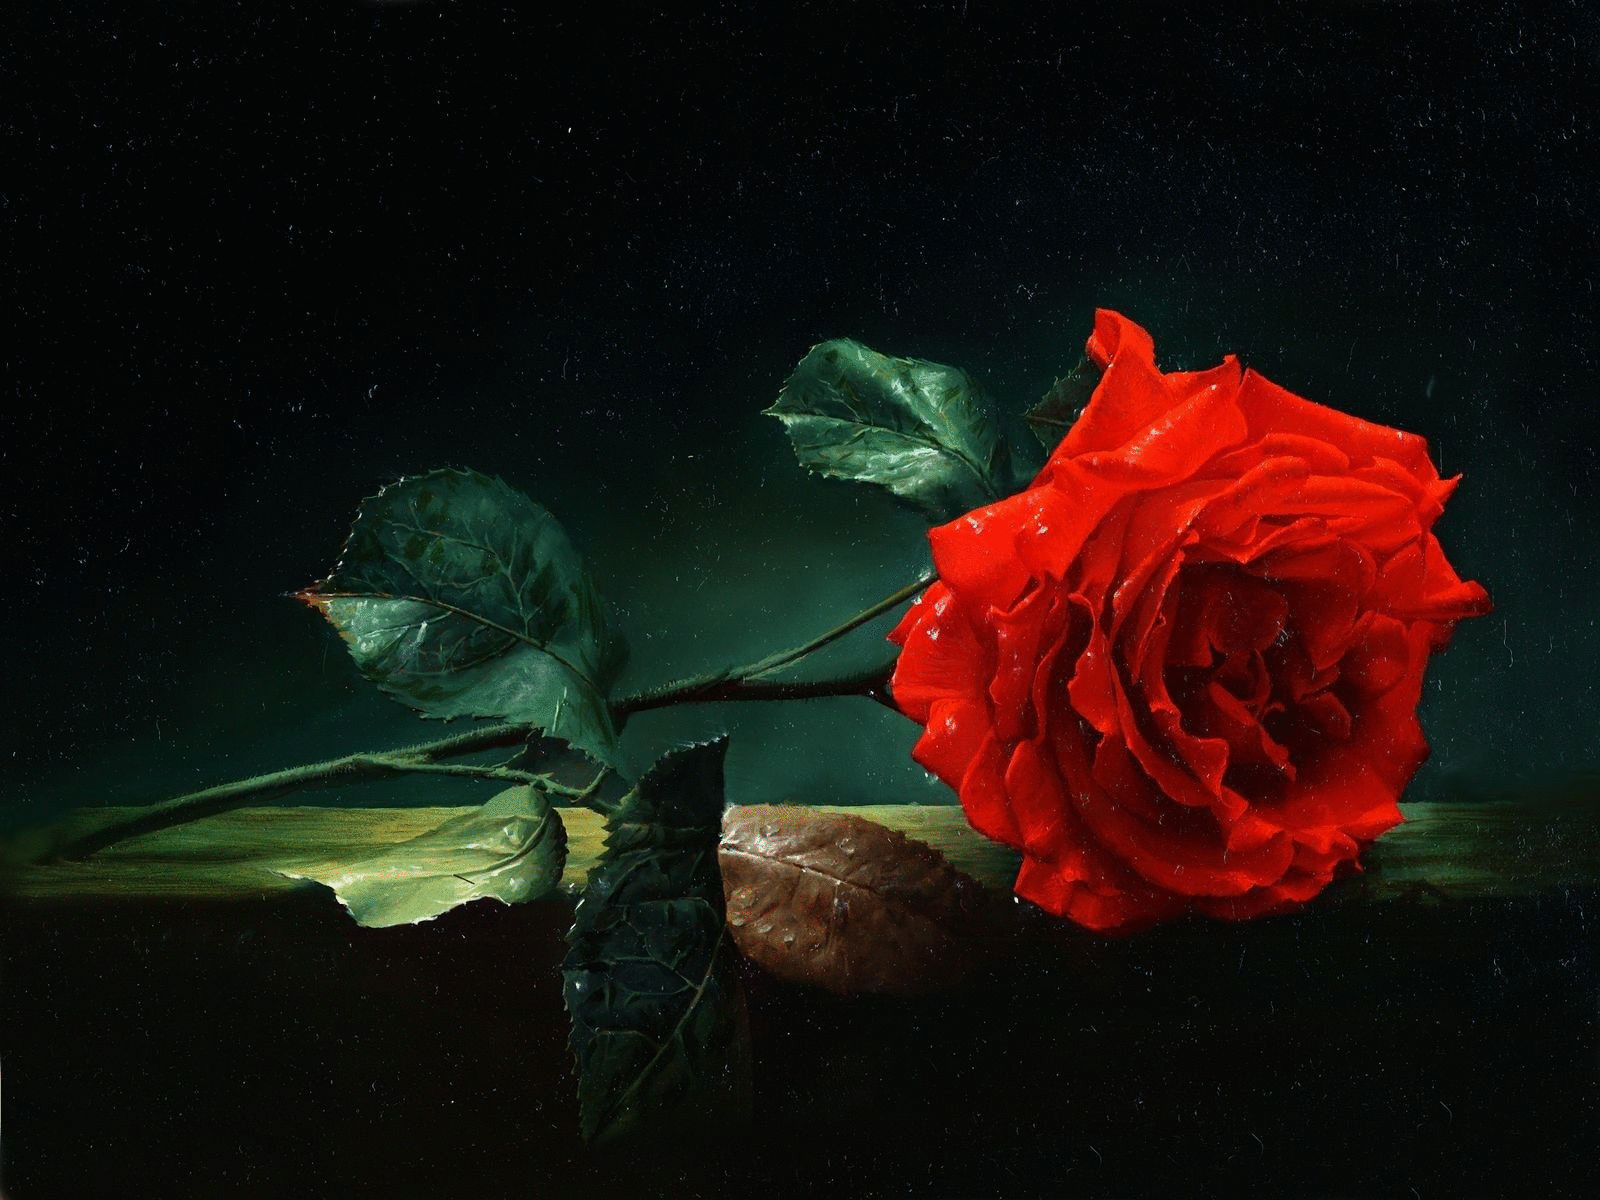 lonely red rose